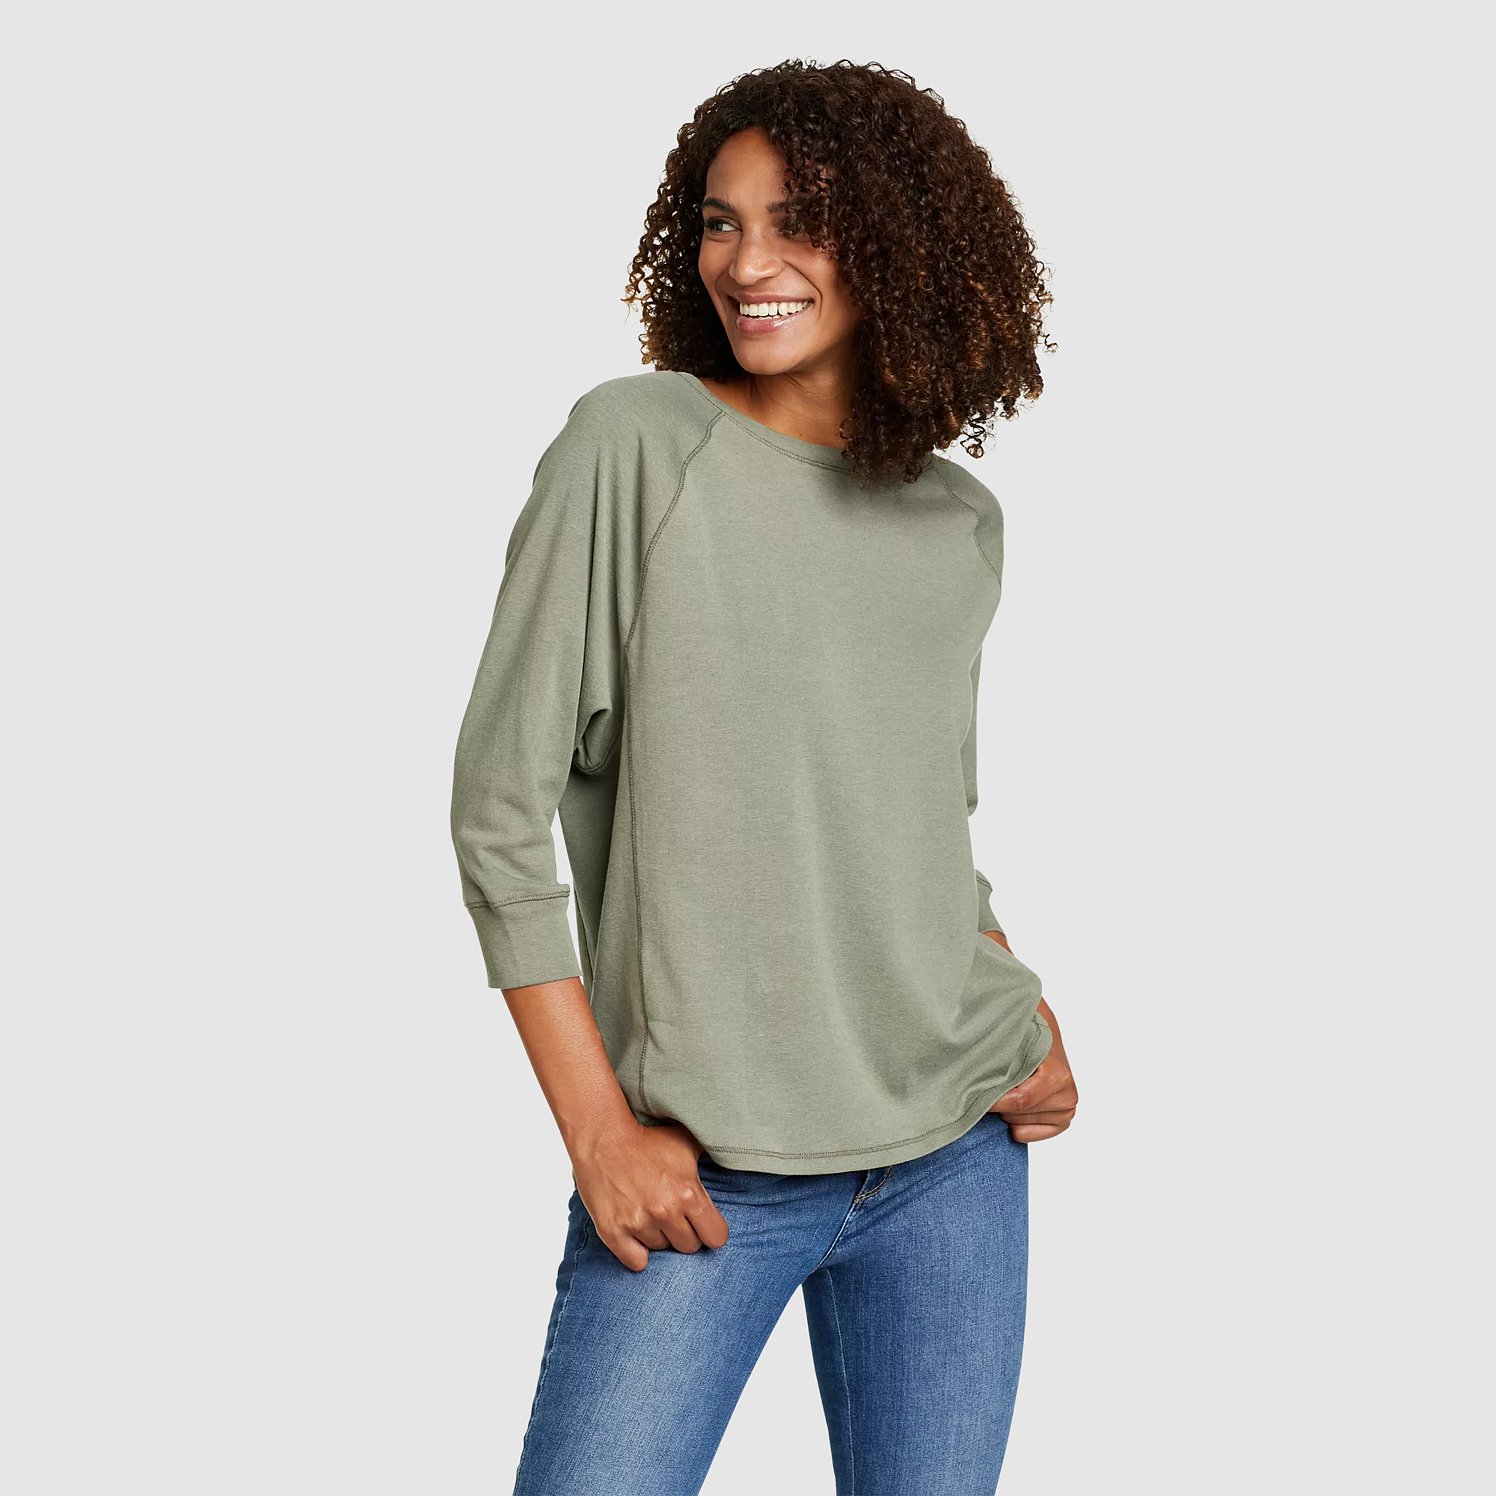 Perfect Dolman 3/4 Sleeve Top in Powder – Research and Design